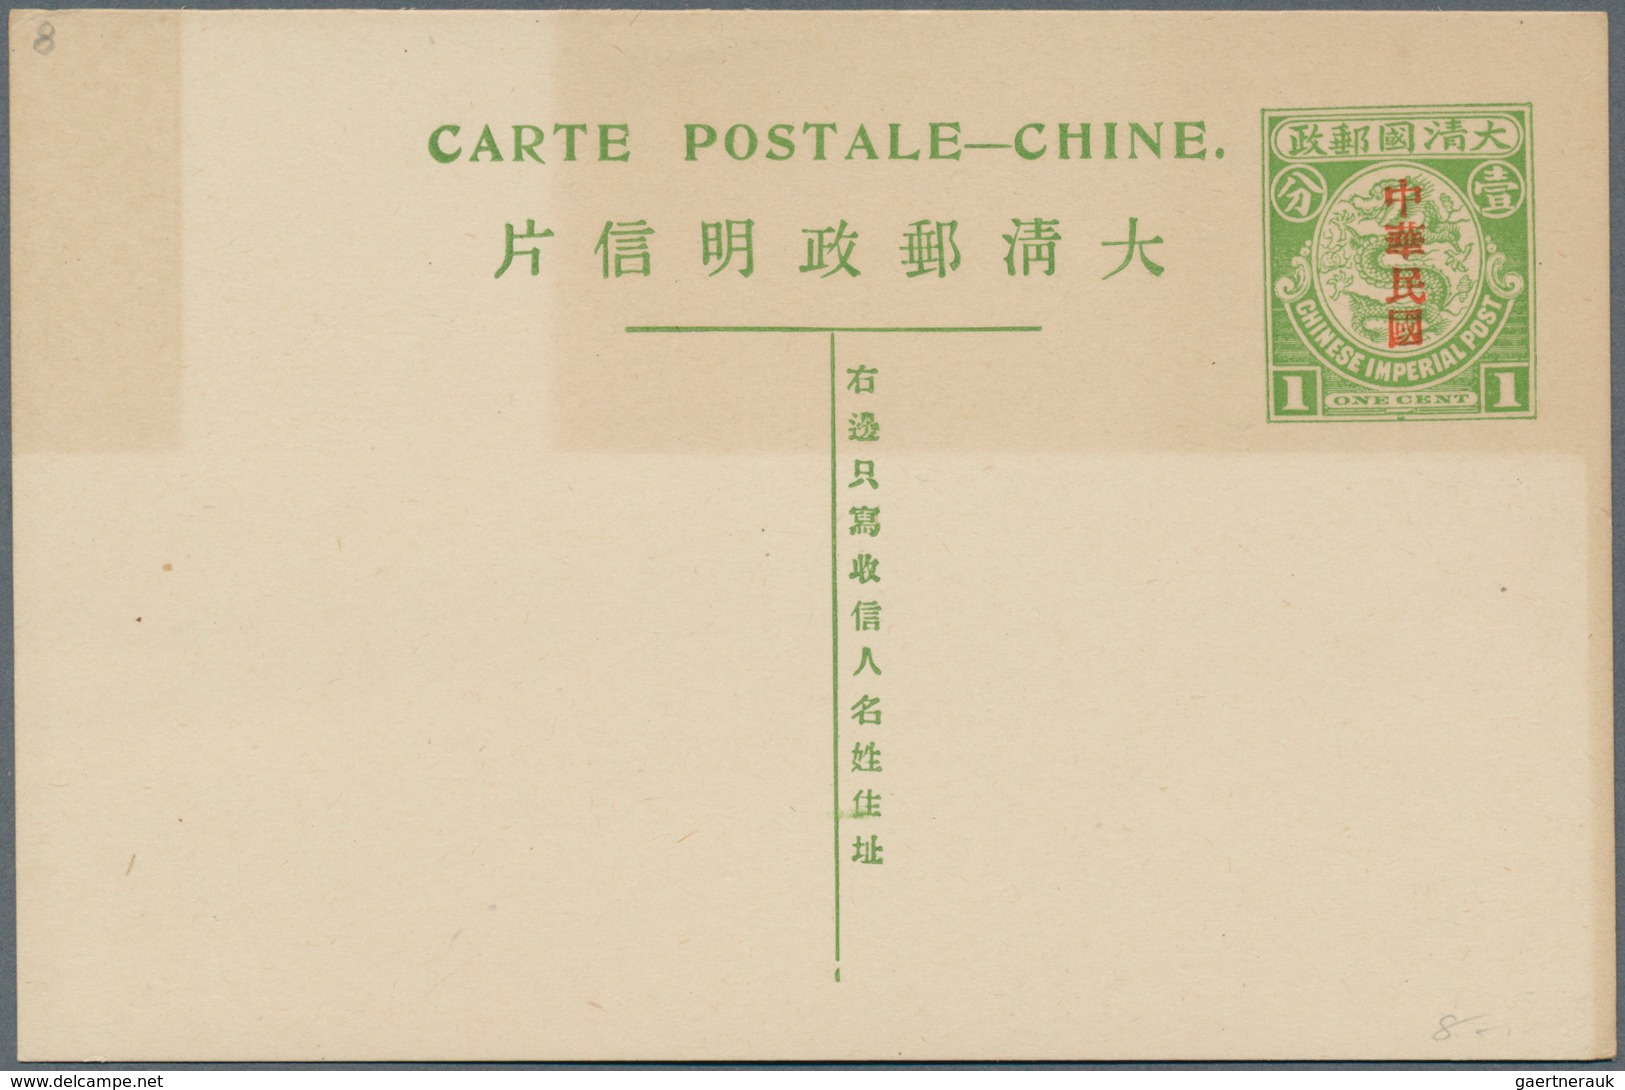 22412 China - Ganzsachen: 1897/1936 (ca.), mint lot stationery (9 inc. double cards x5), x2-ex part toning